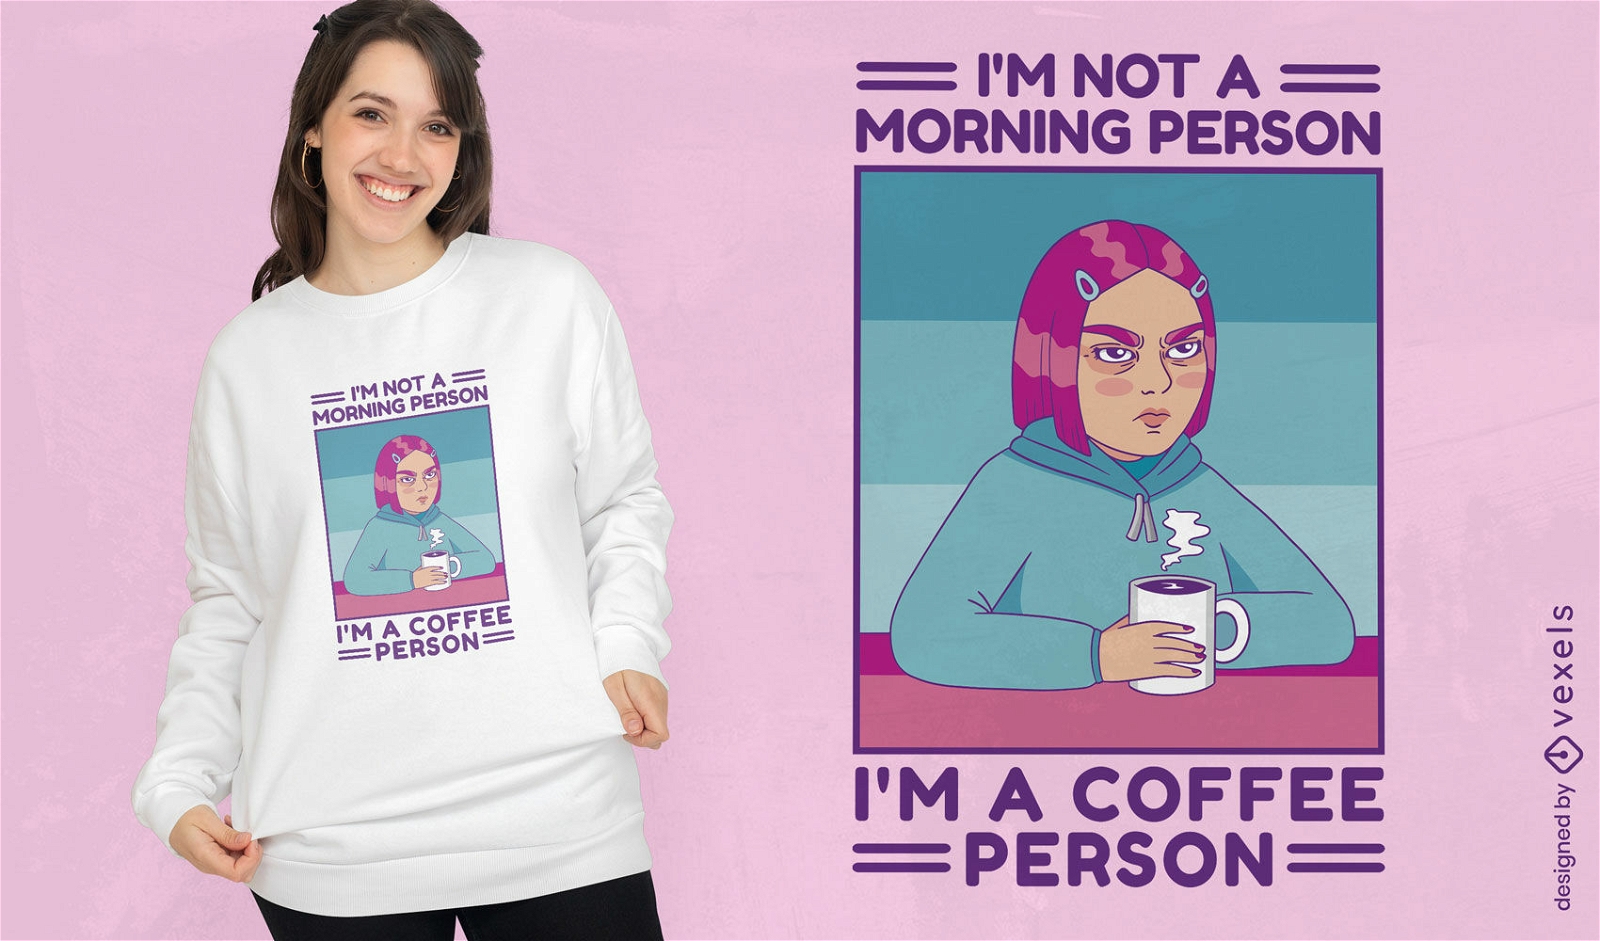 Angry woman and coffee t-shirt design